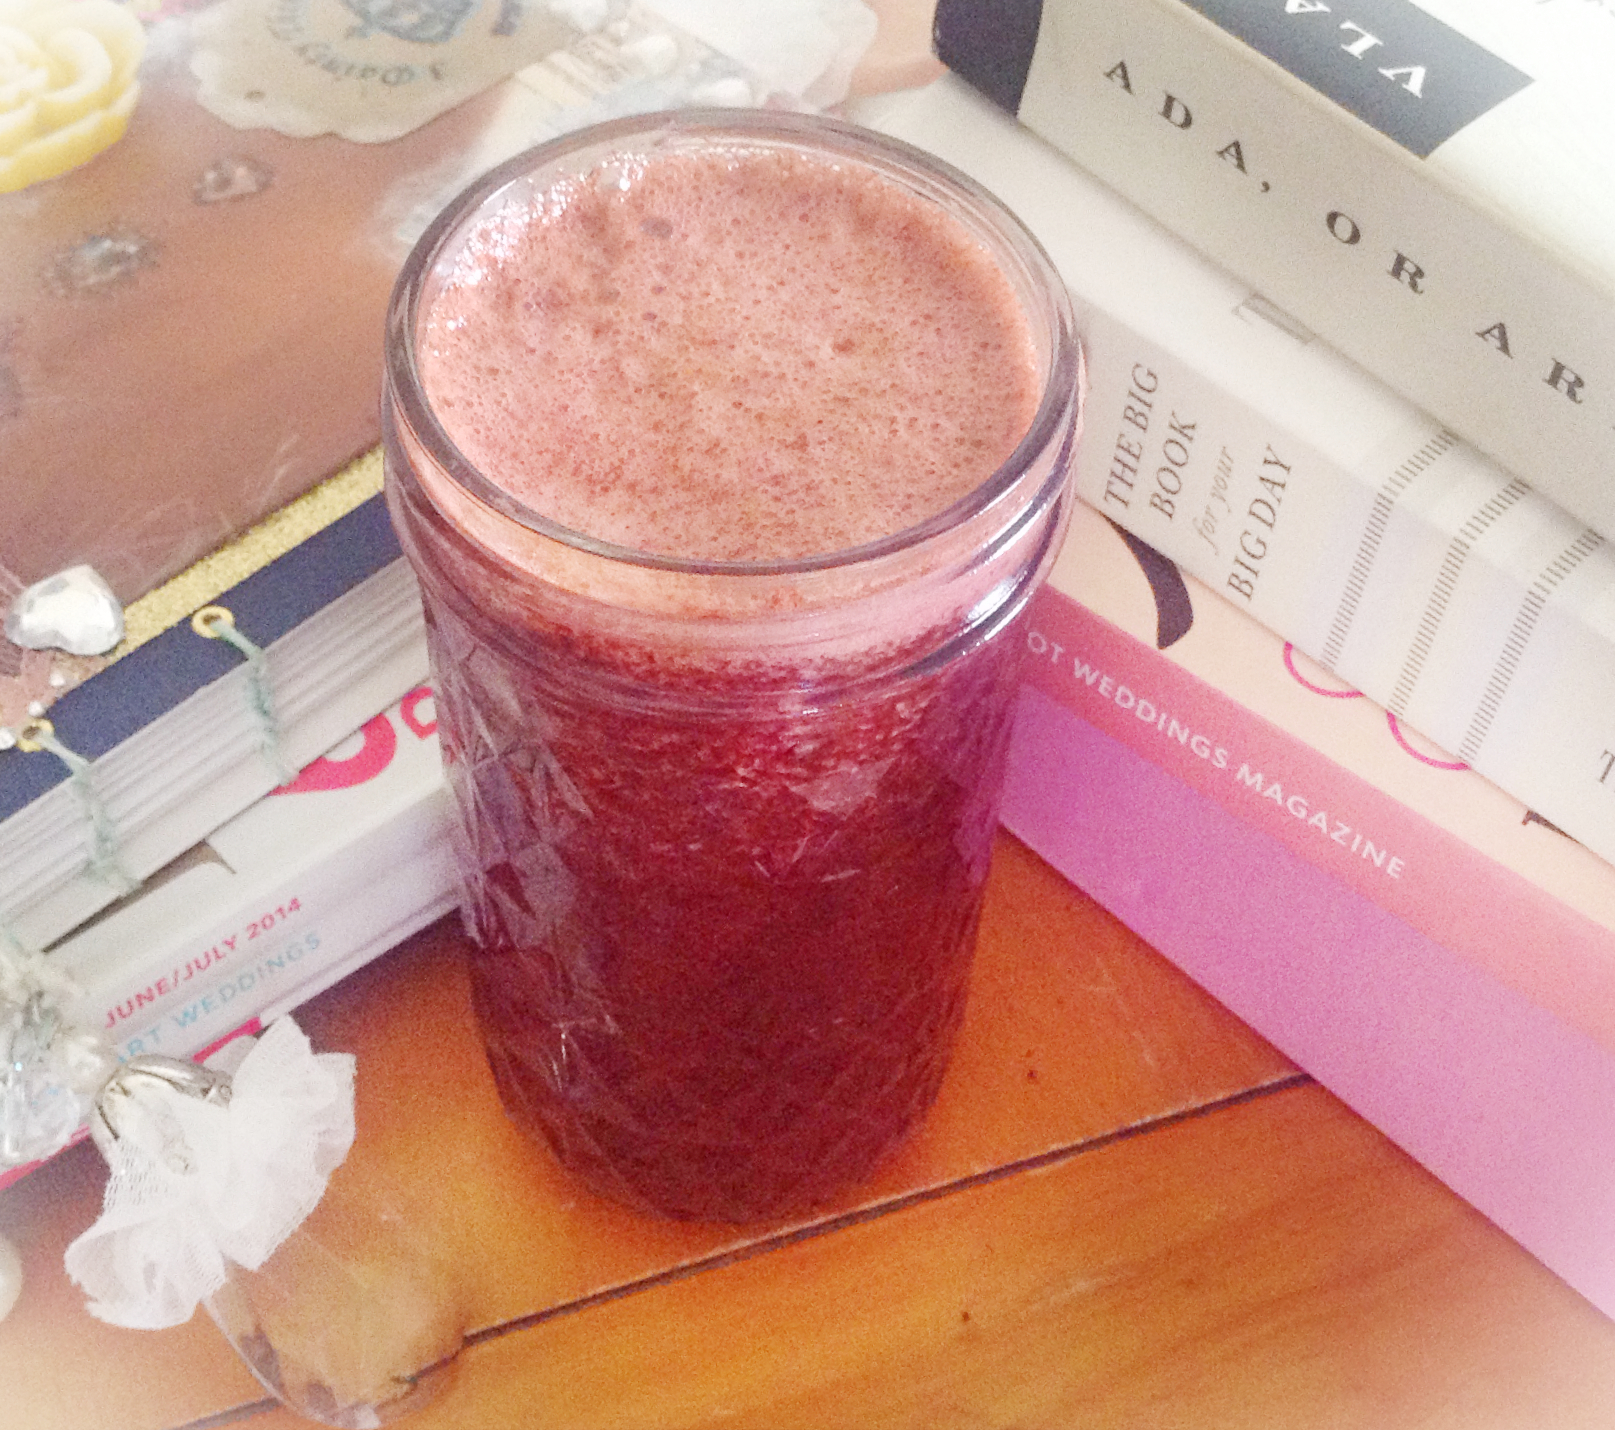 Healthy Snack: Energizing Red Juice